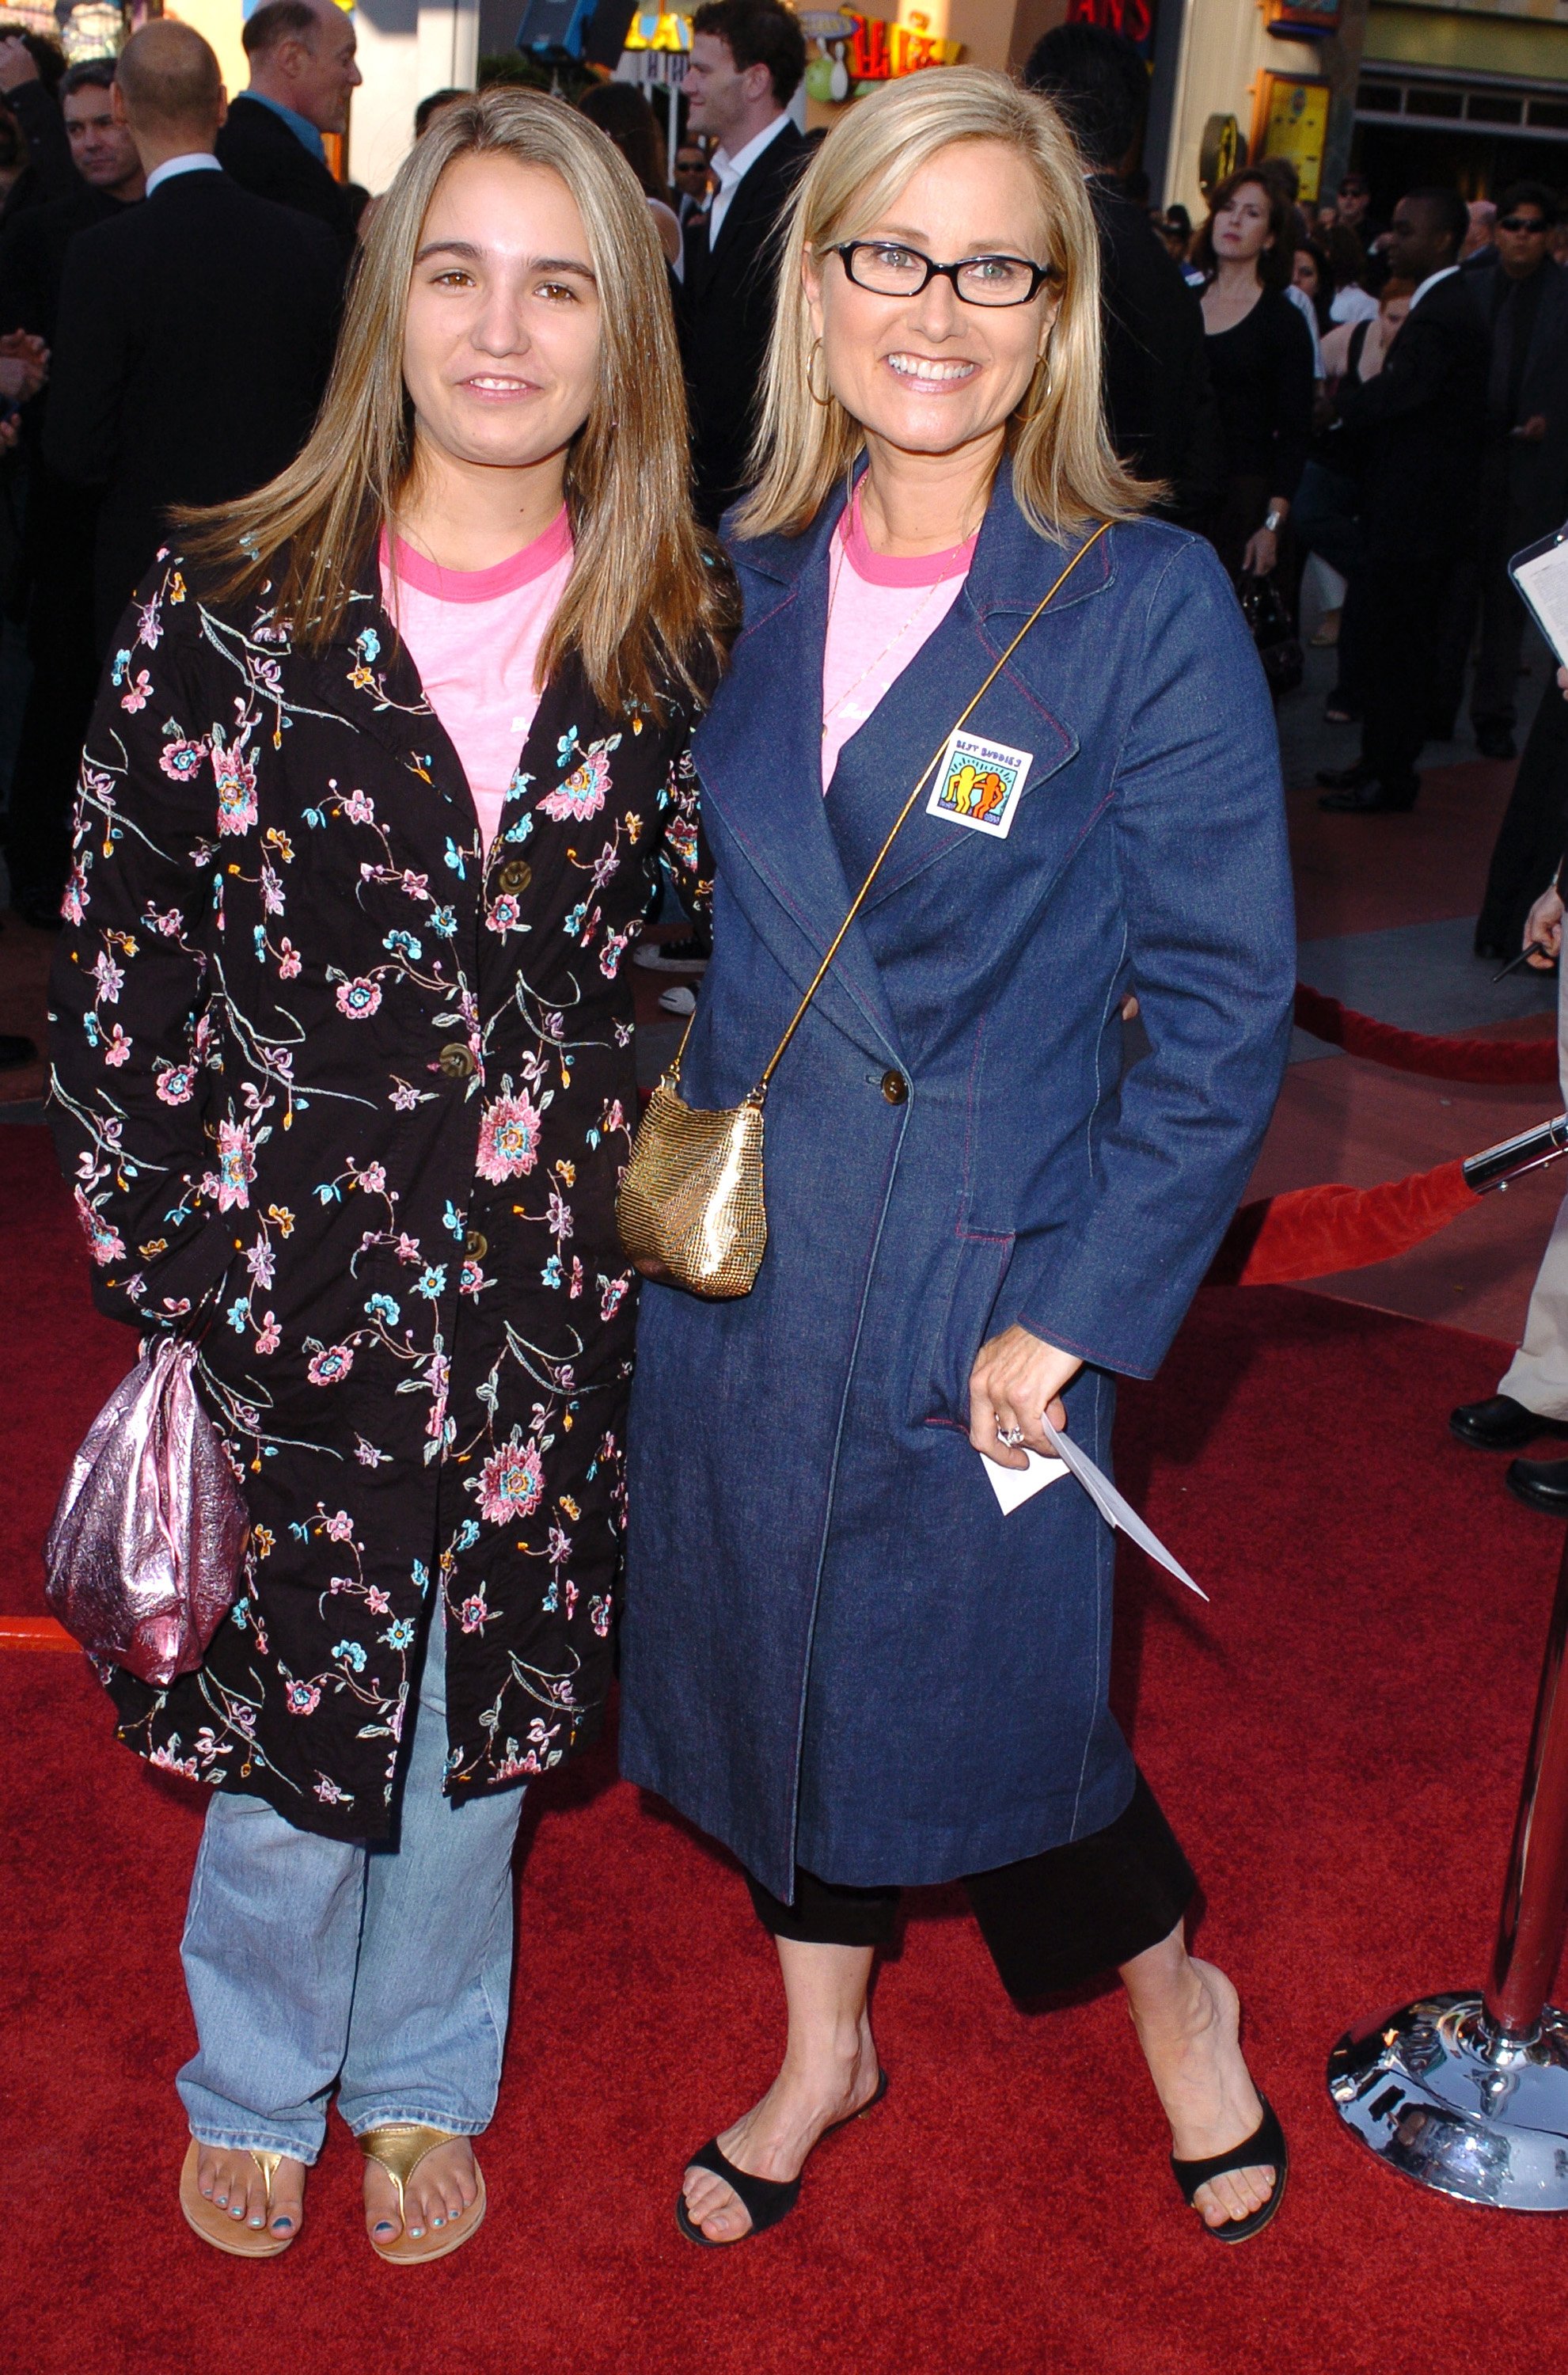 Maureen McCormick and her daughter Natalie Cummings in attendance of the "Cinderella Man" premiere at TheGibson Amphitheatre, Universal City, California, in 2005. | Source: Getty Images